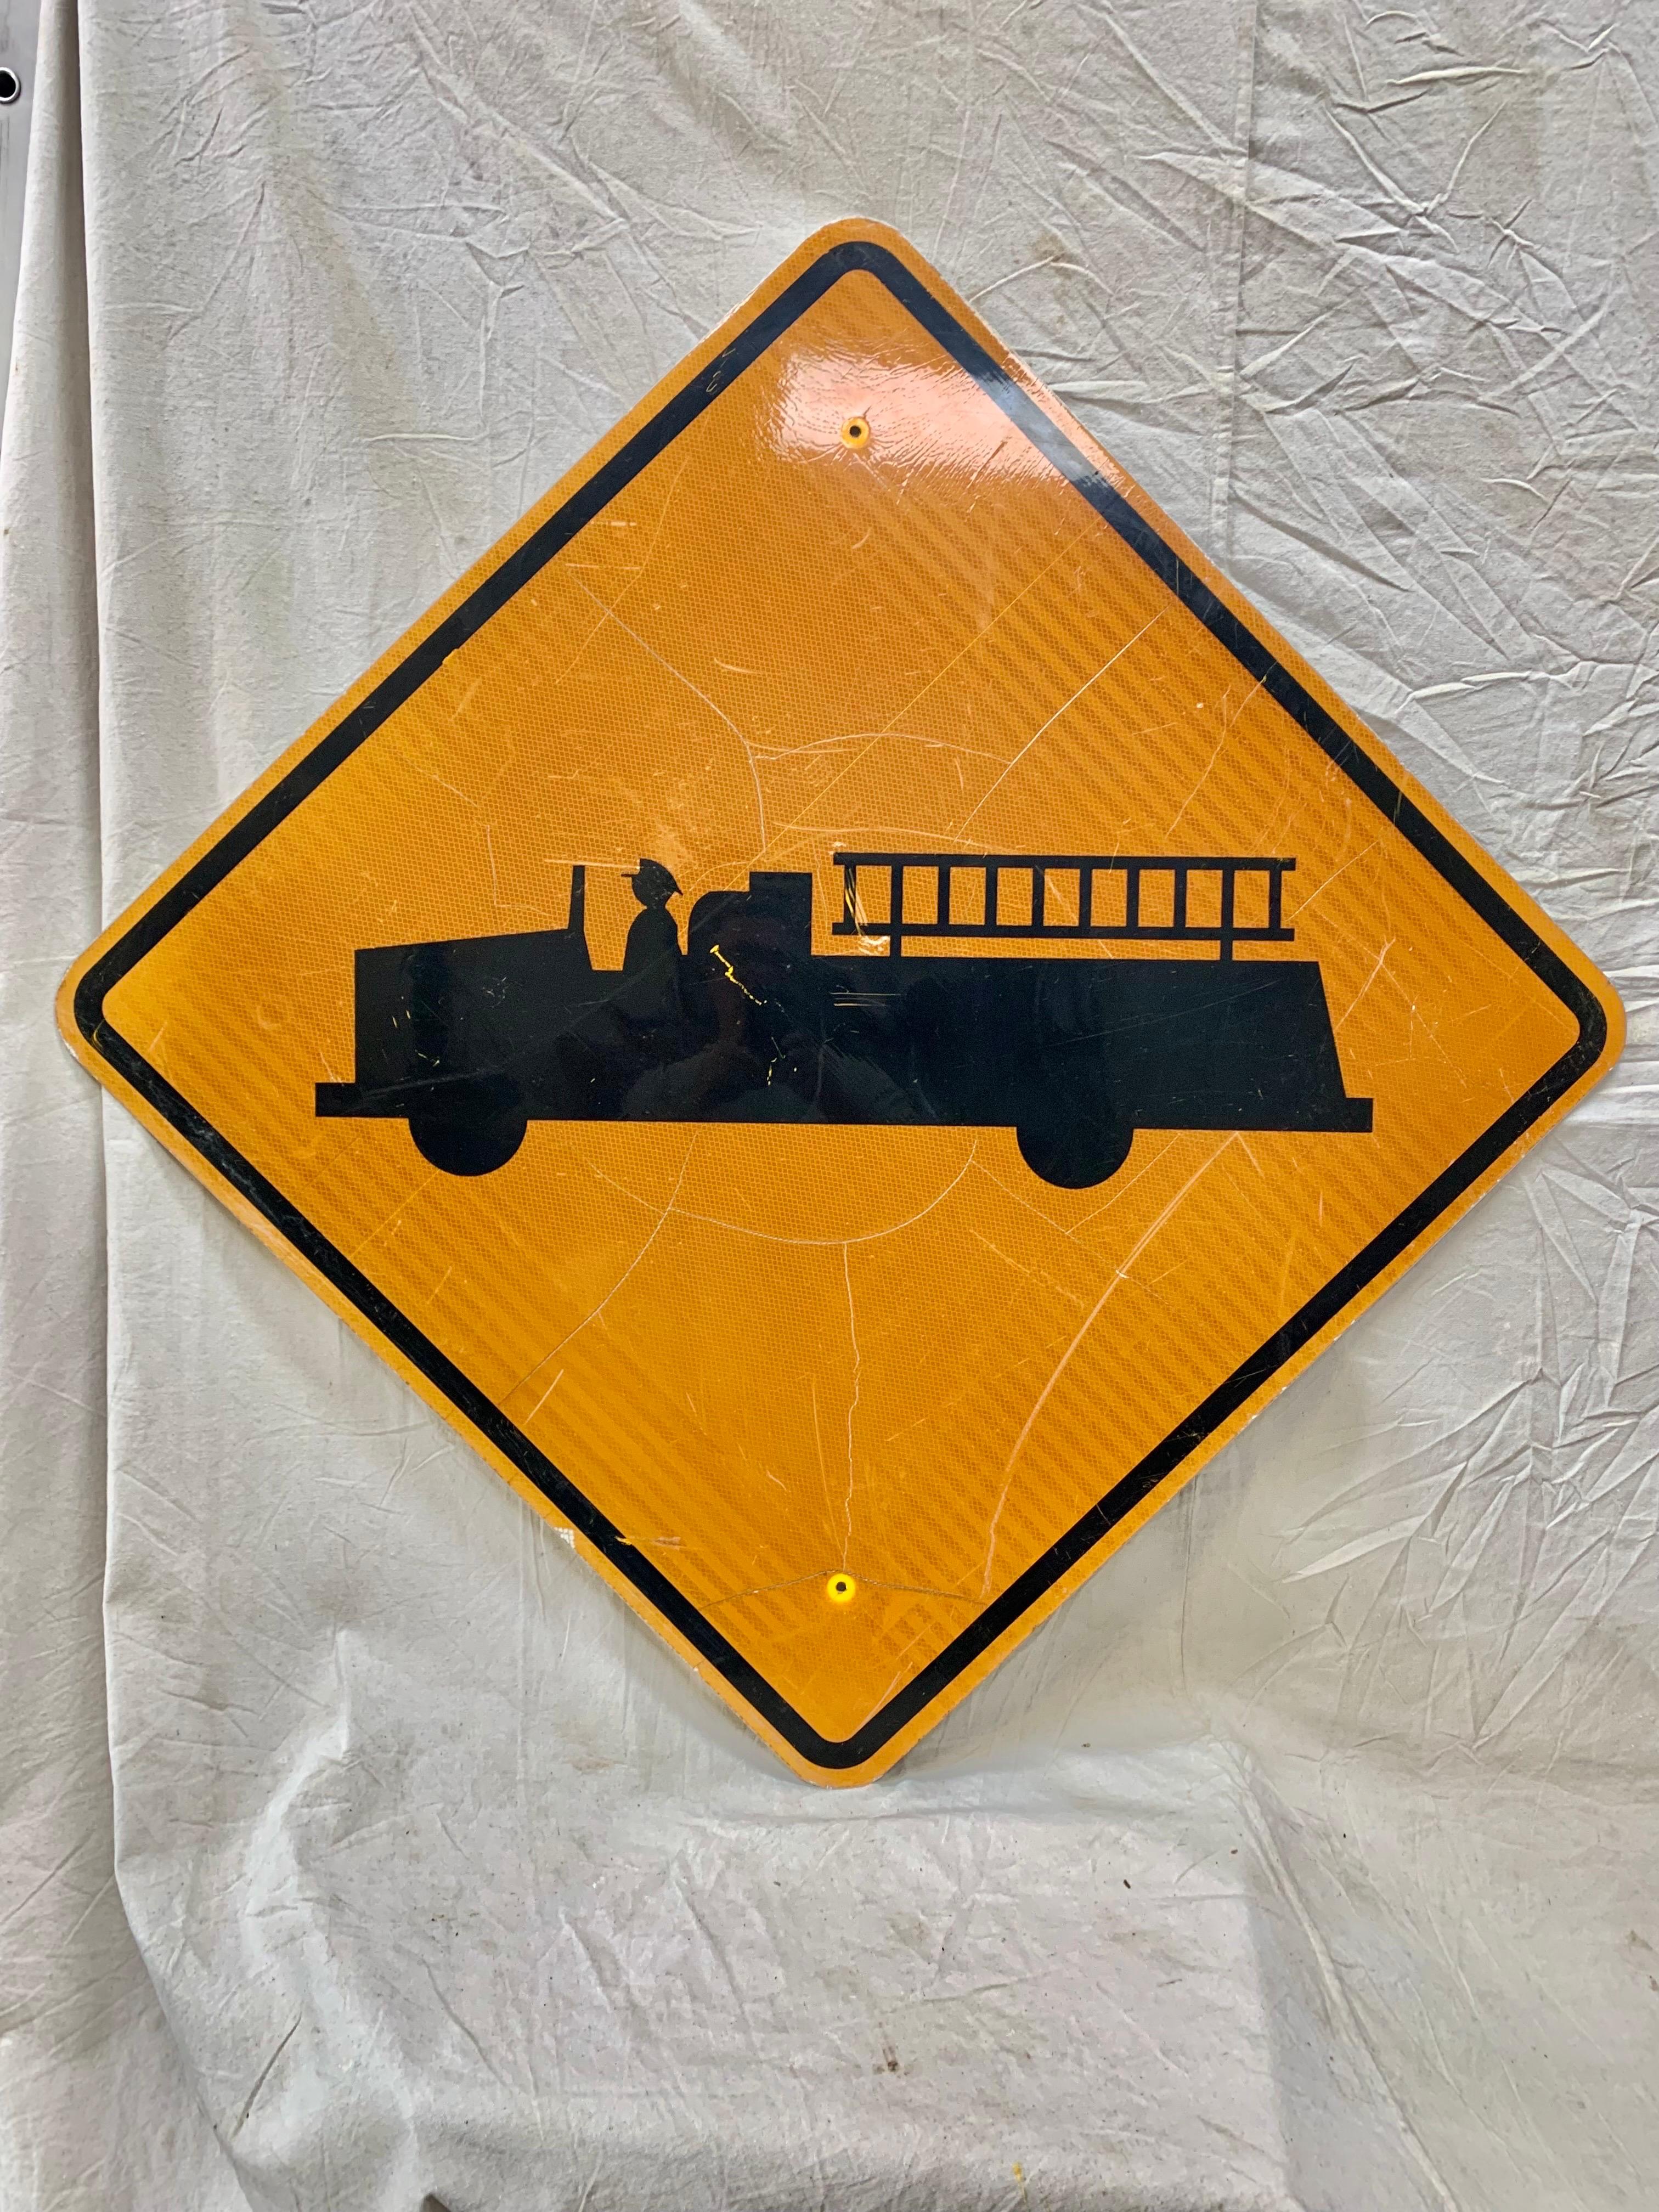 road sign with truck meaning